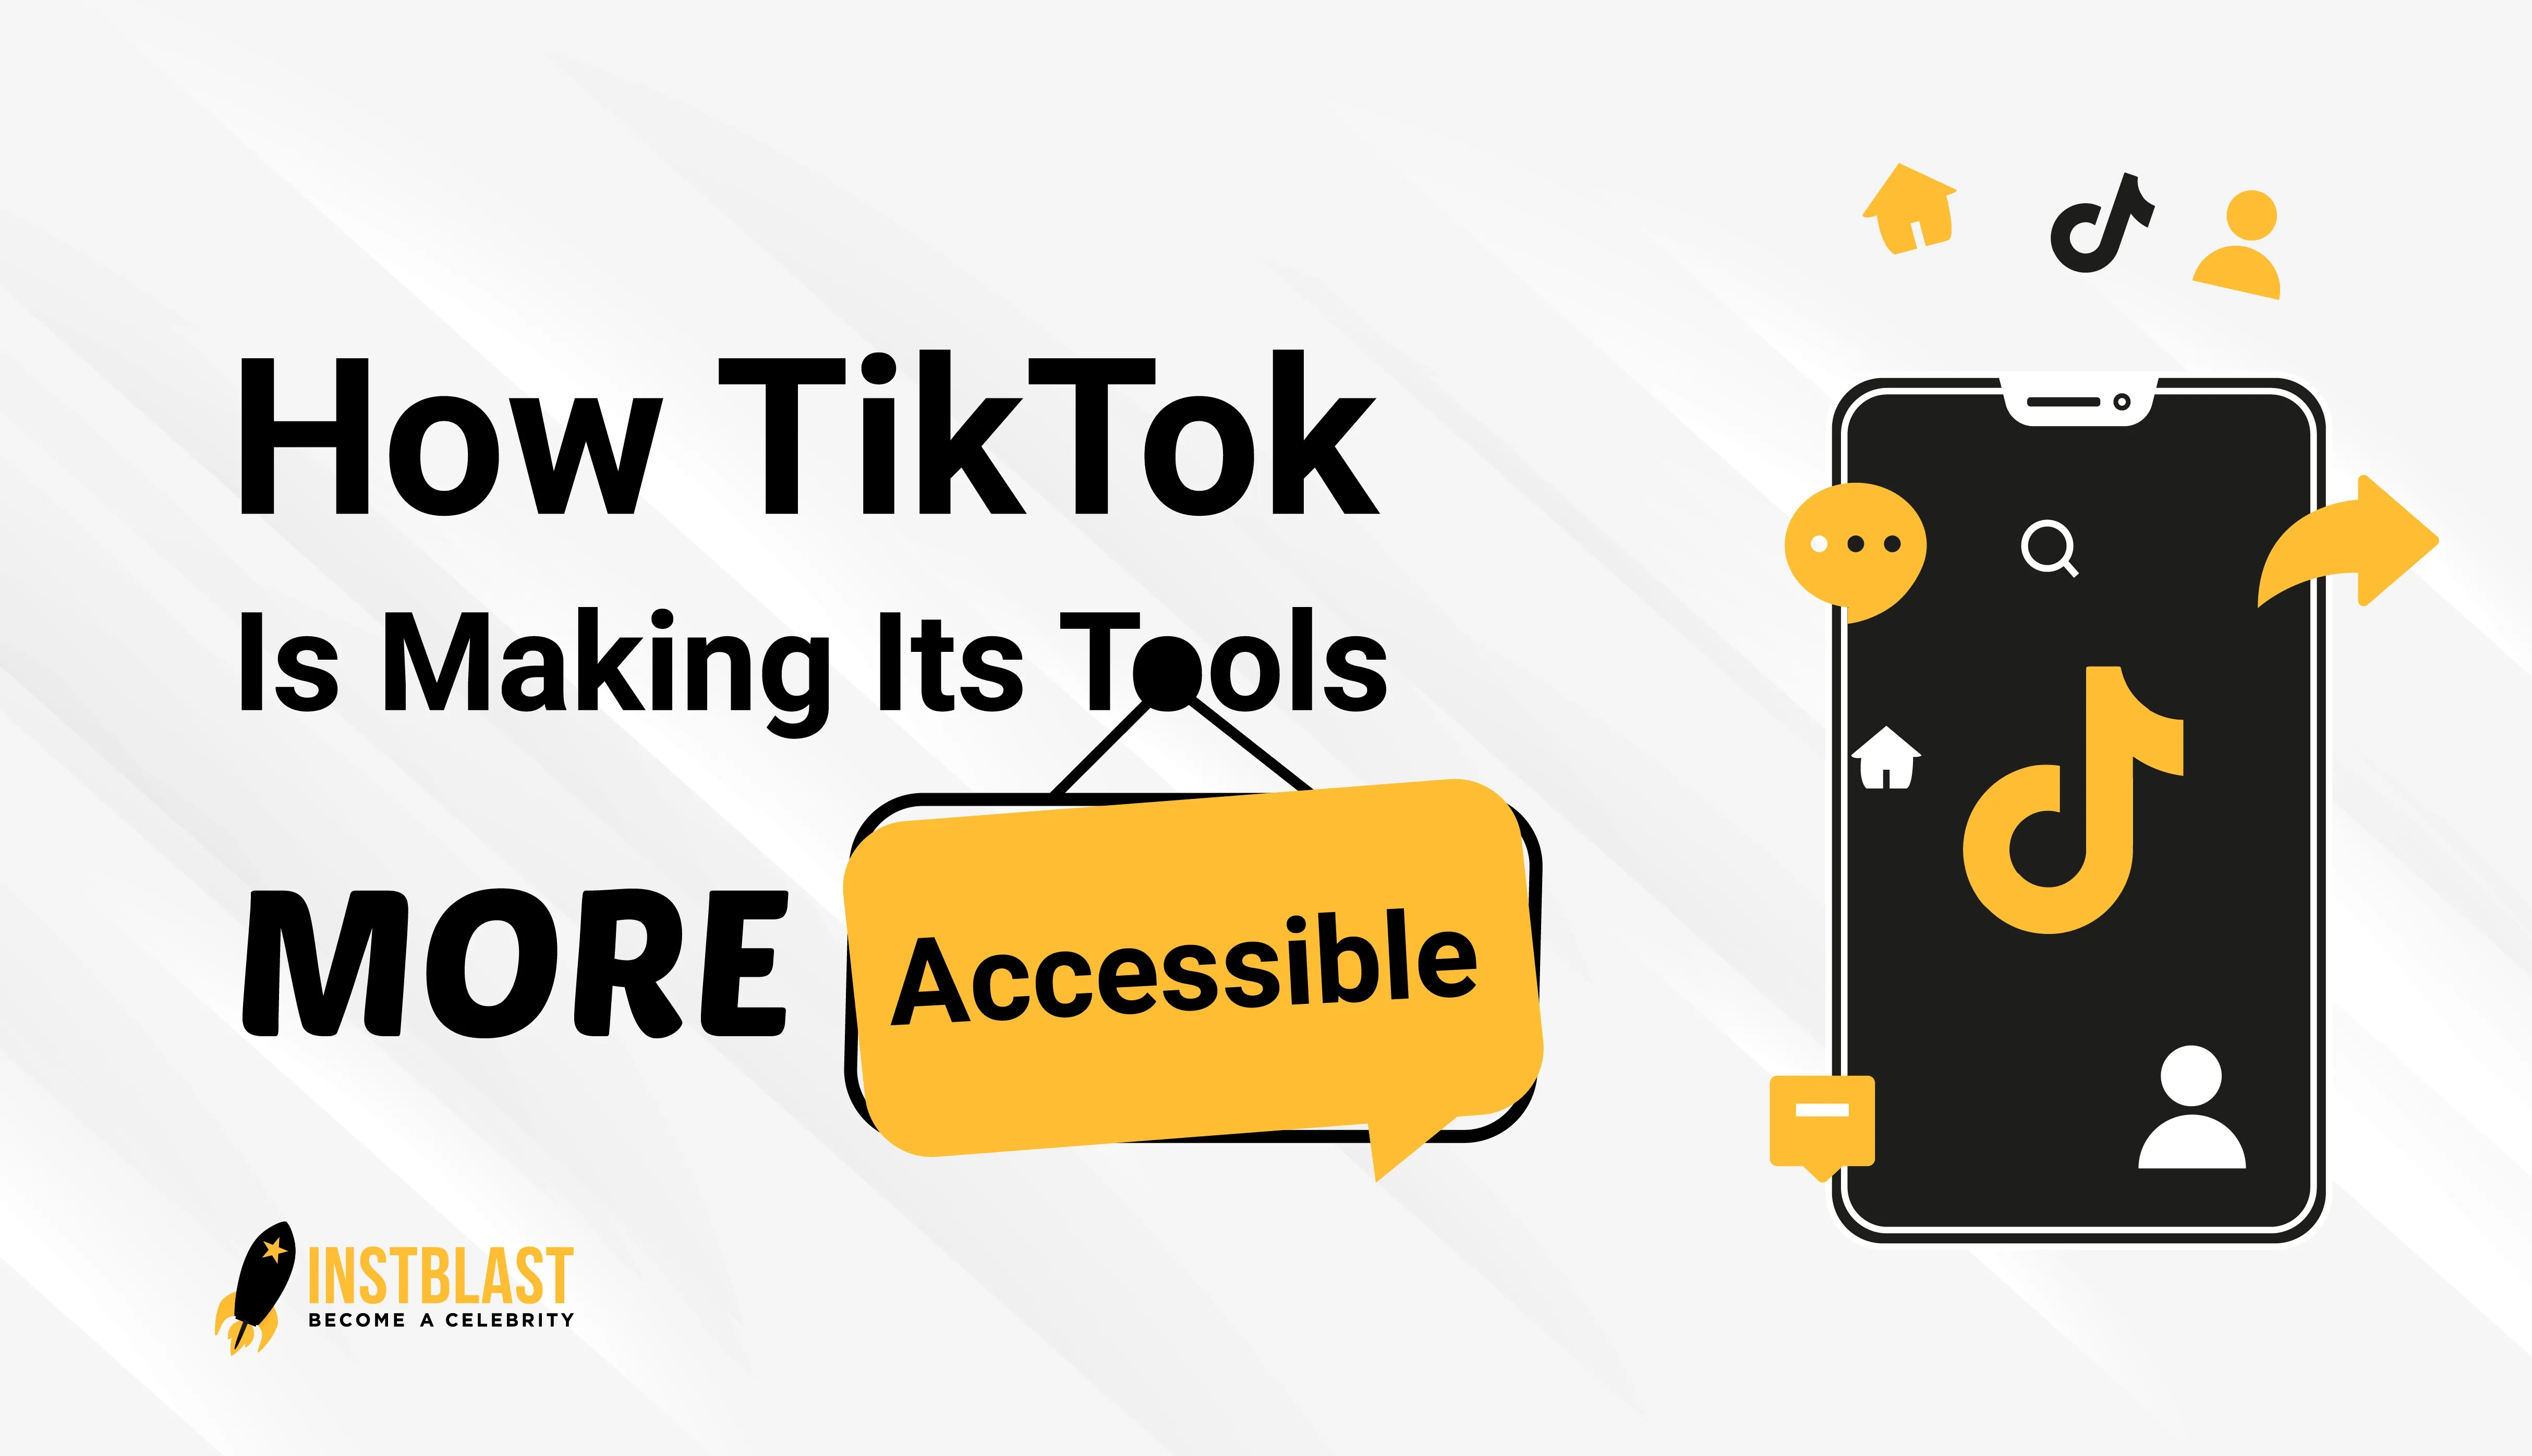 How TikTok is making its tools more accessible